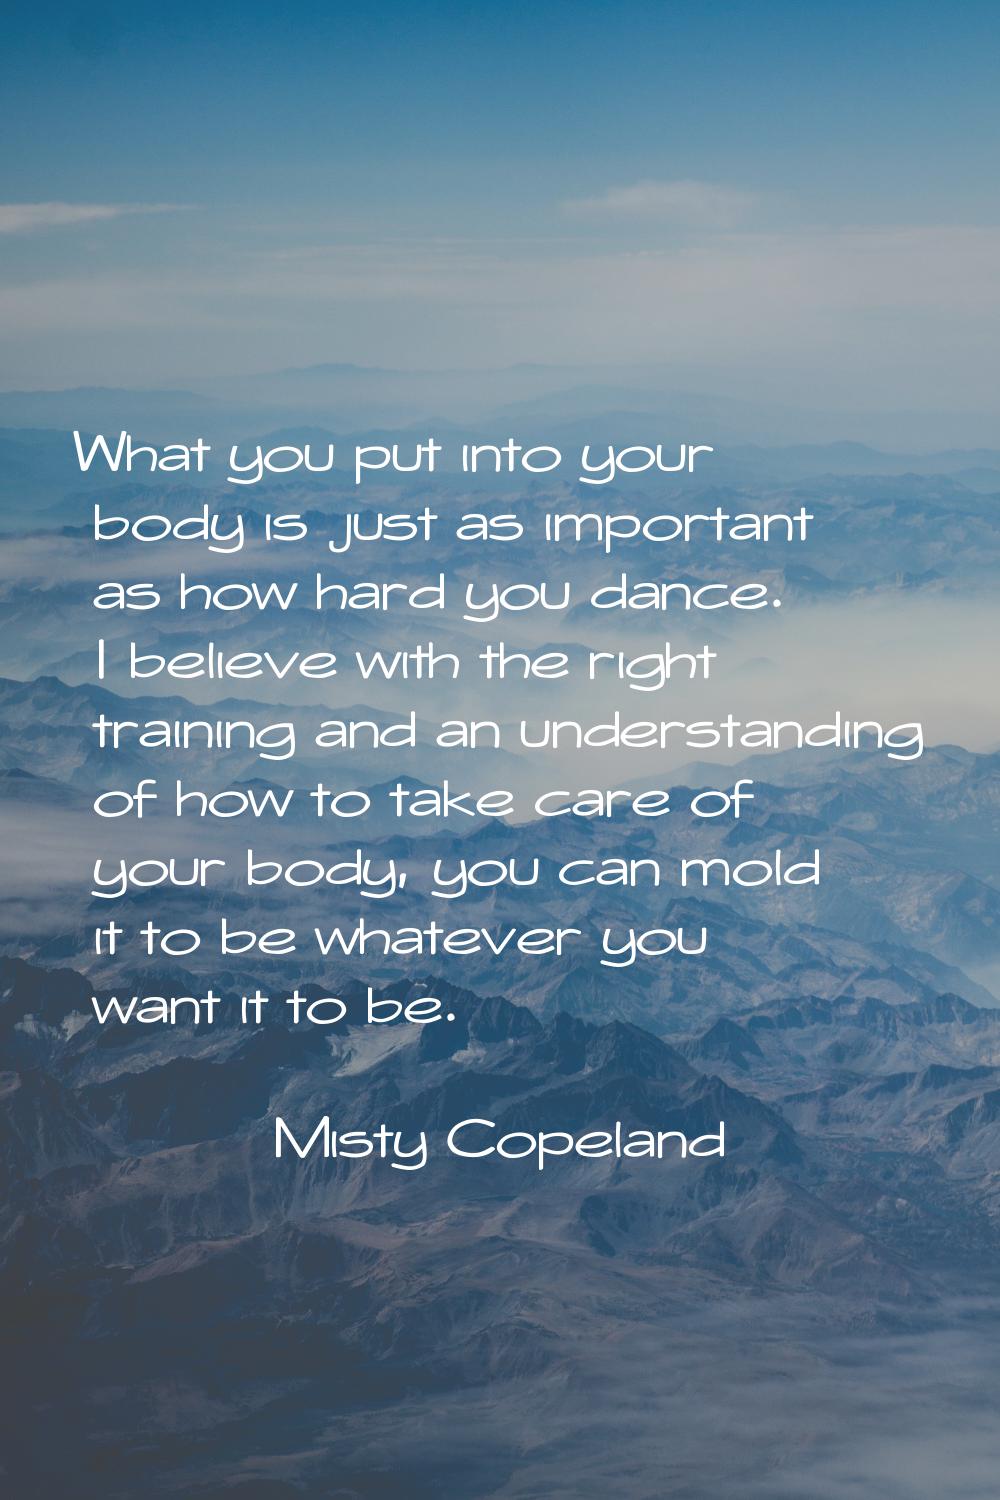 What you put into your body is just as important as how hard you dance. I believe with the right tr